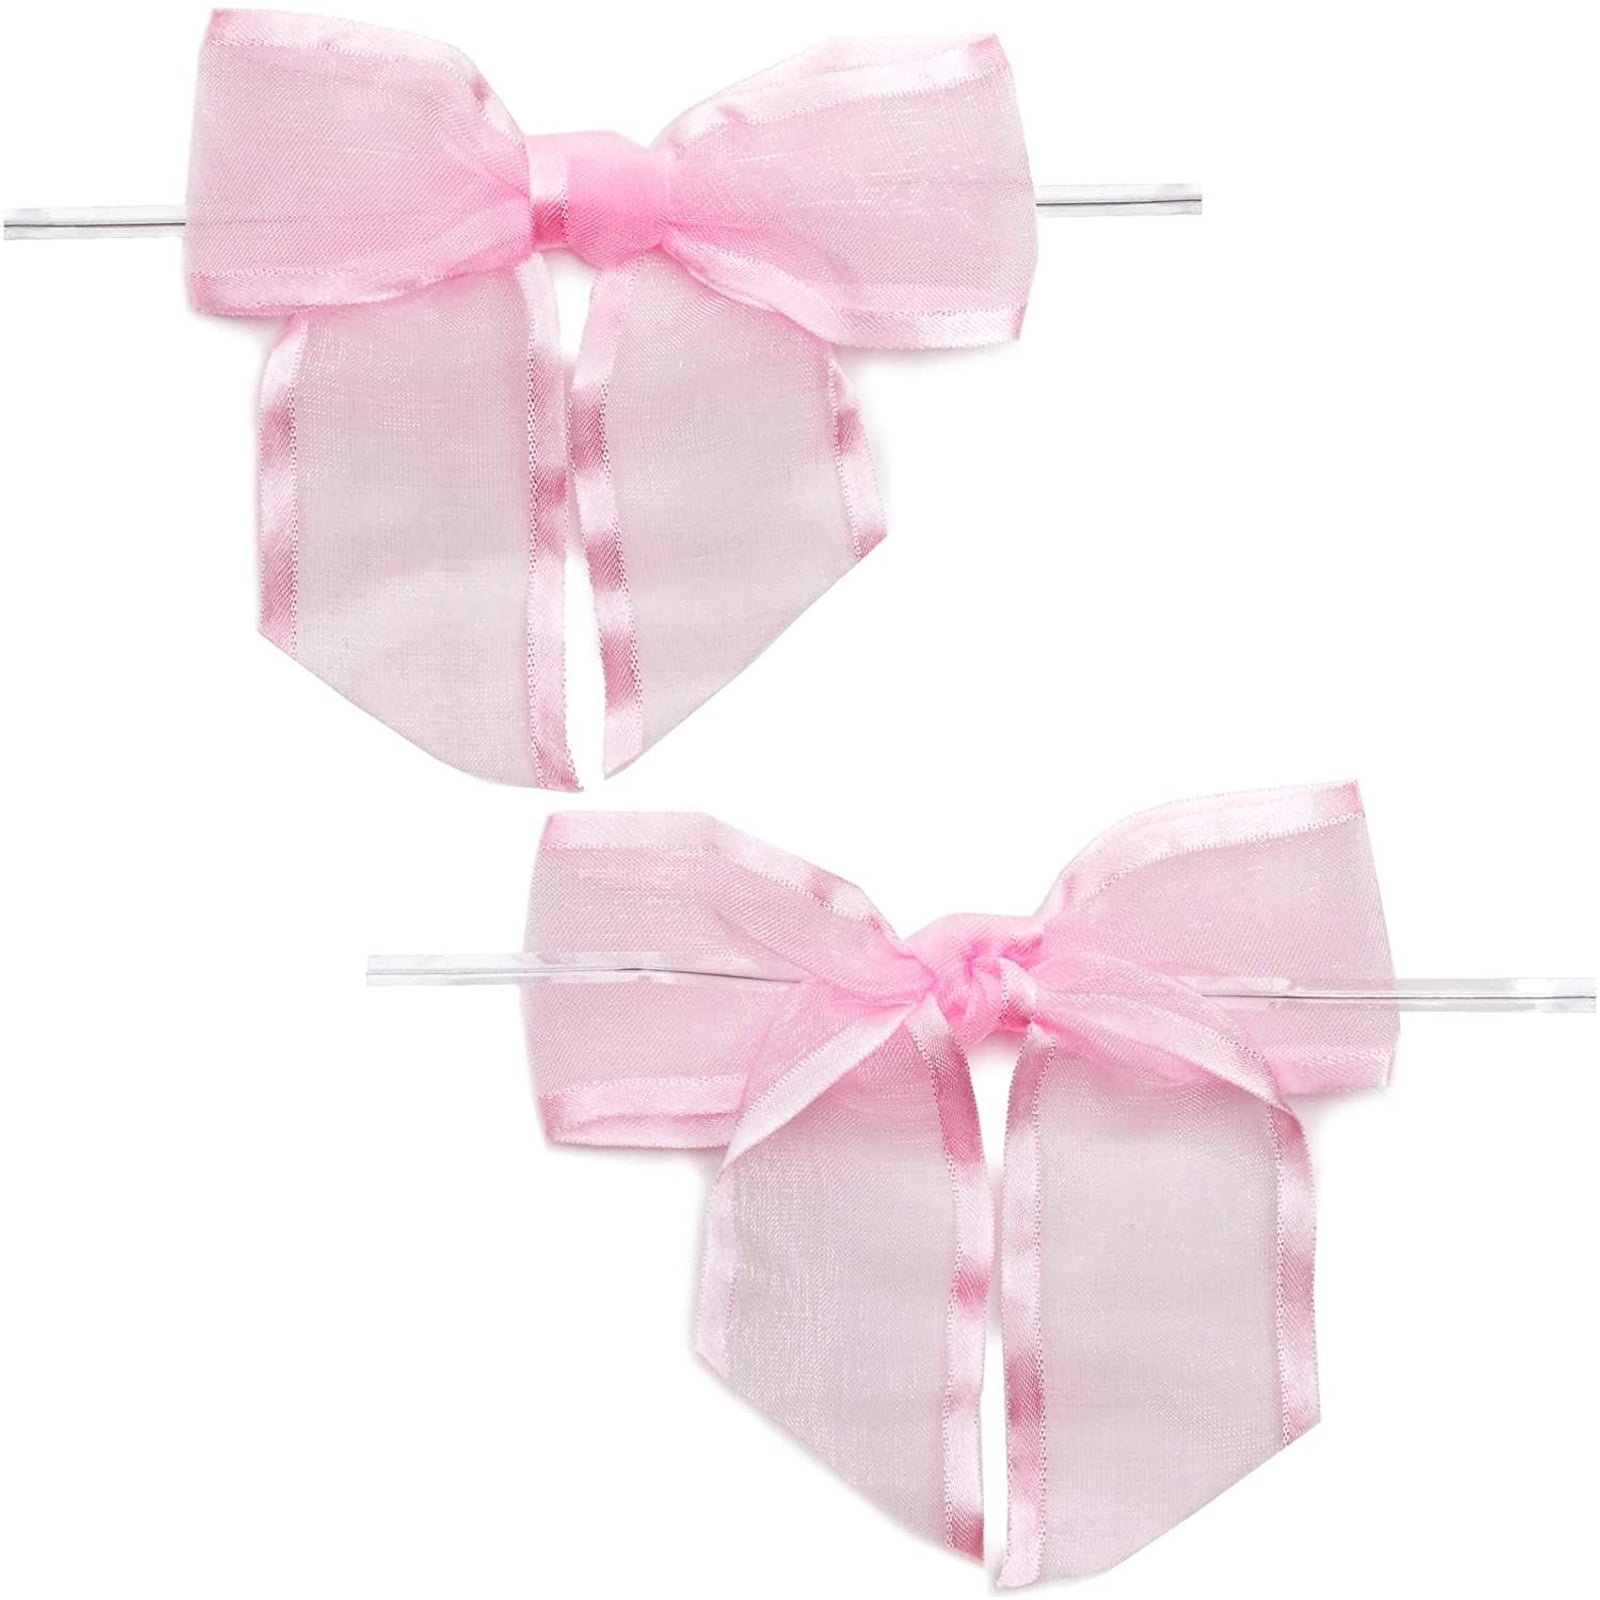 6 pastel organza bows for craft projects